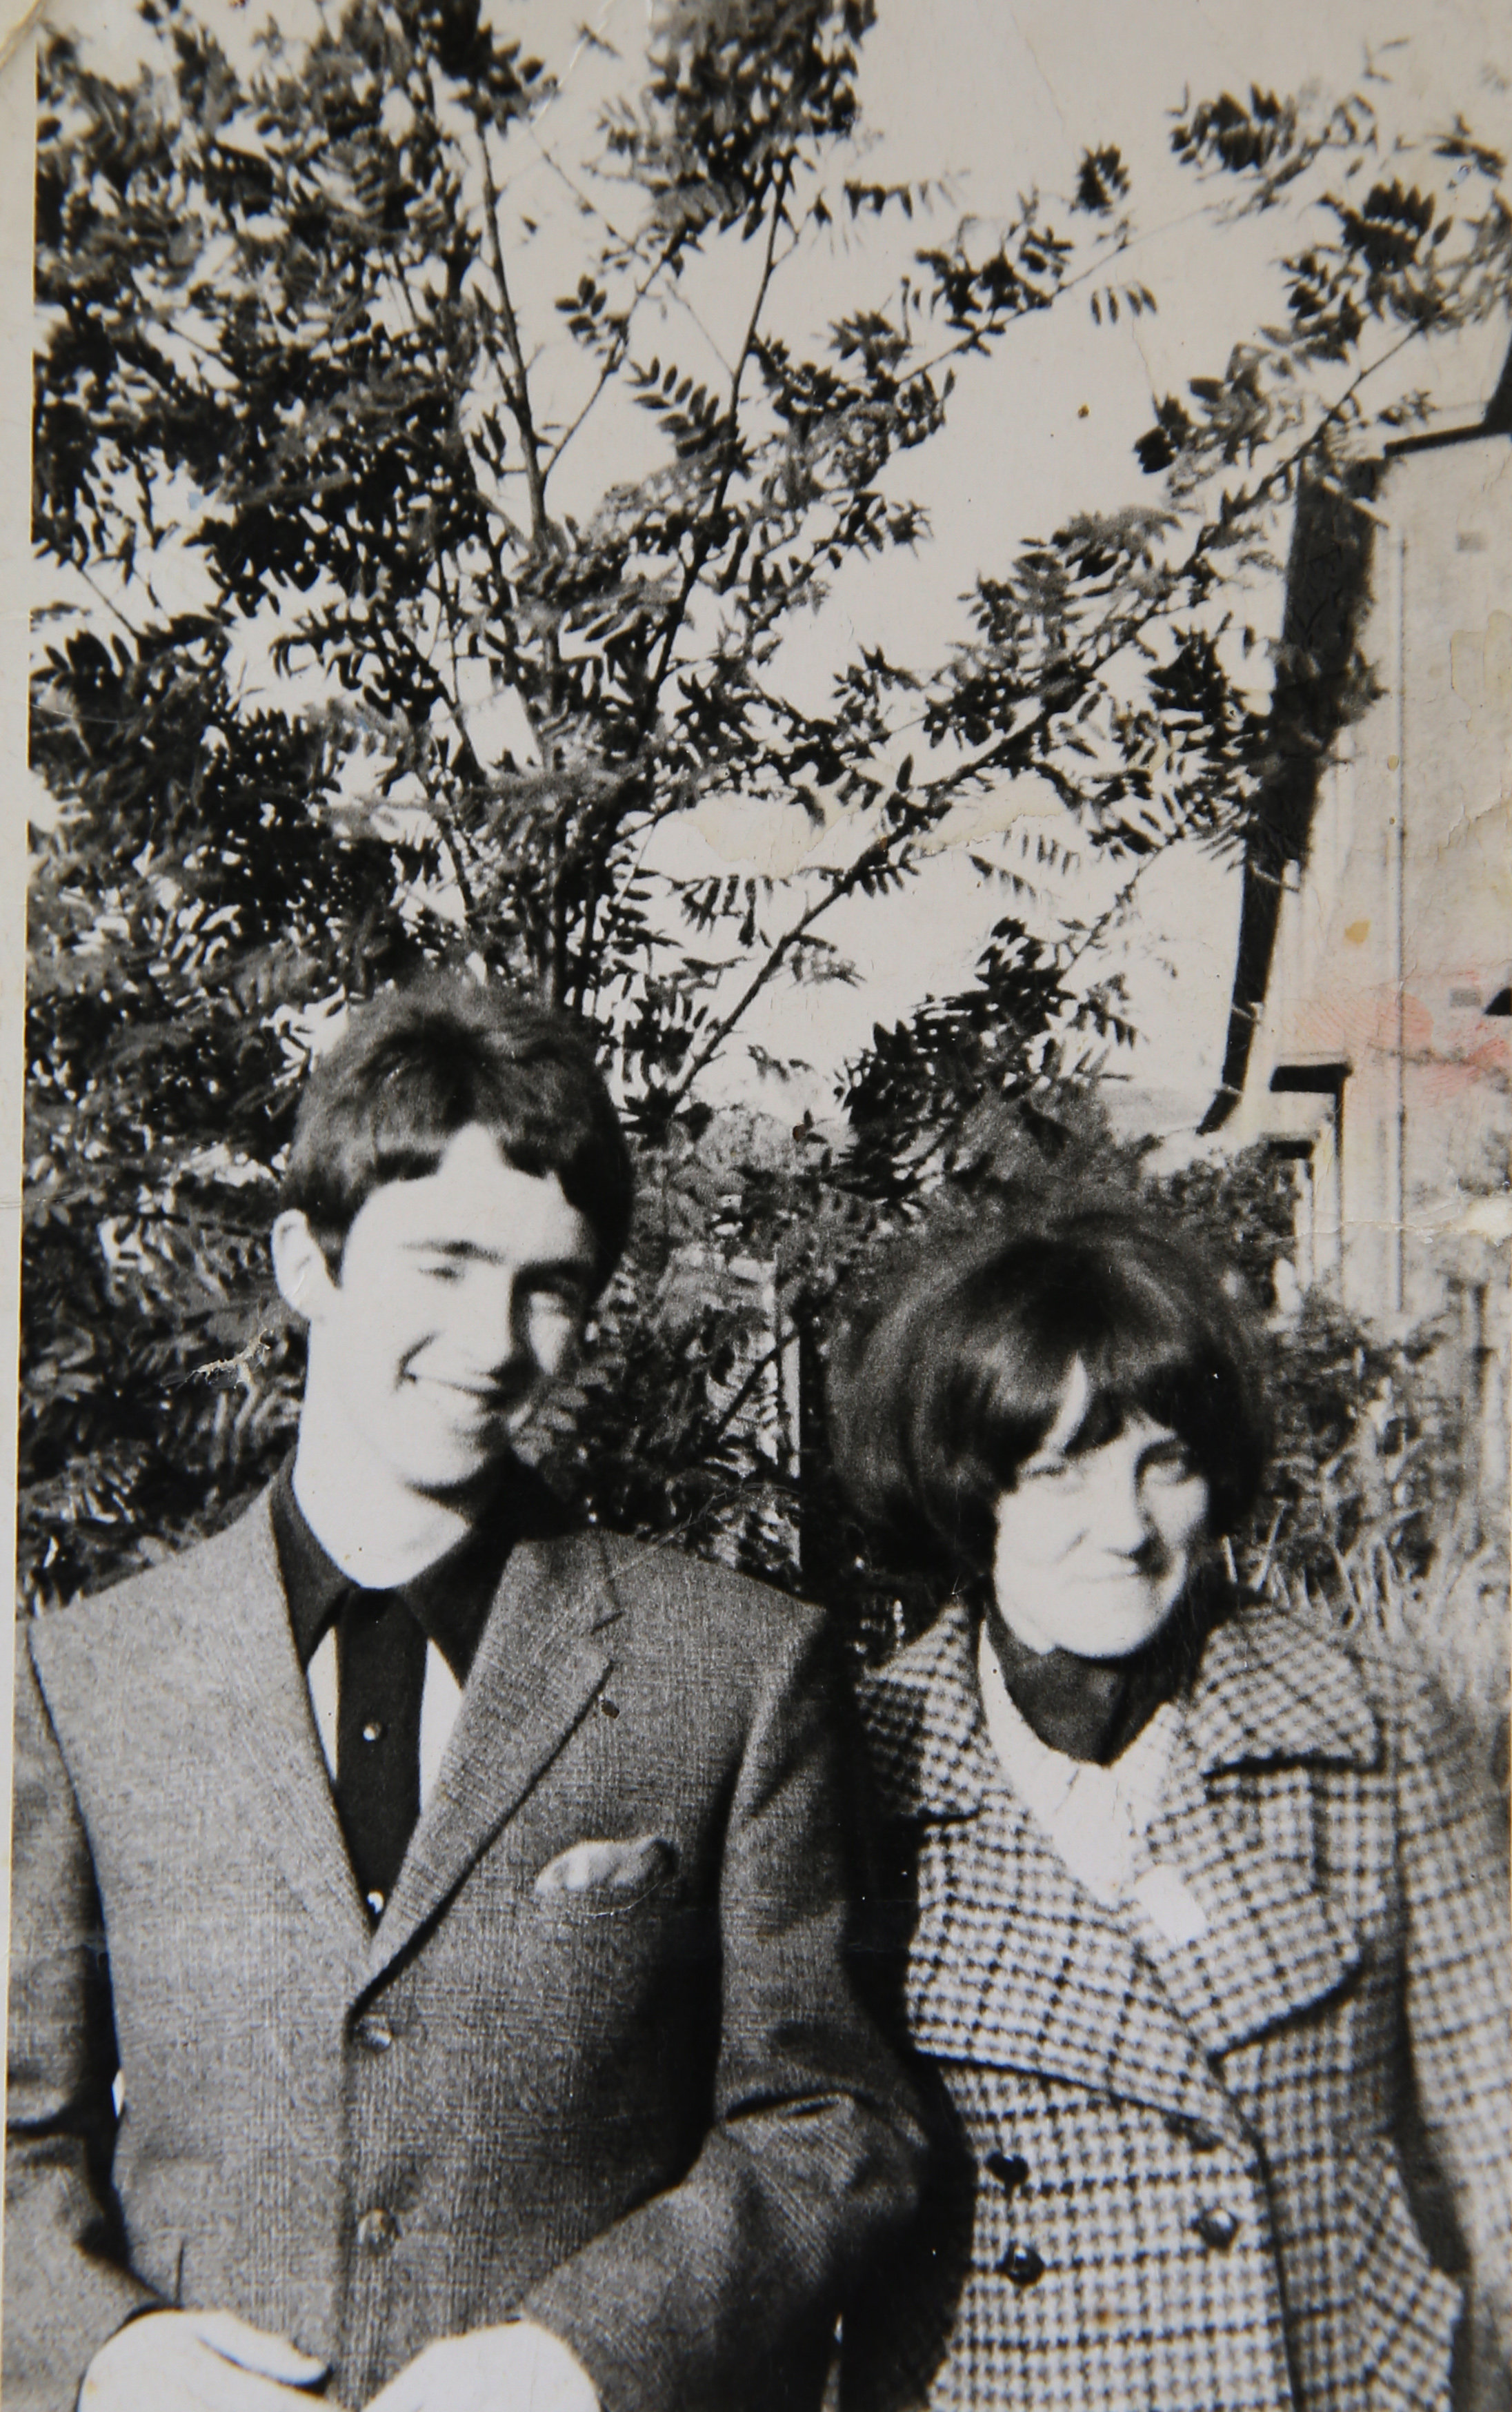 Glasgow Times past feature. Isabel and Brian McNulty pictured in 1966.. Isabel and Brian McNulty from Milton, Glasgow have been together for 53 years after meeting at school, courting at the dancing, and marrying at 18. ...5 May 2021.For GT, see story